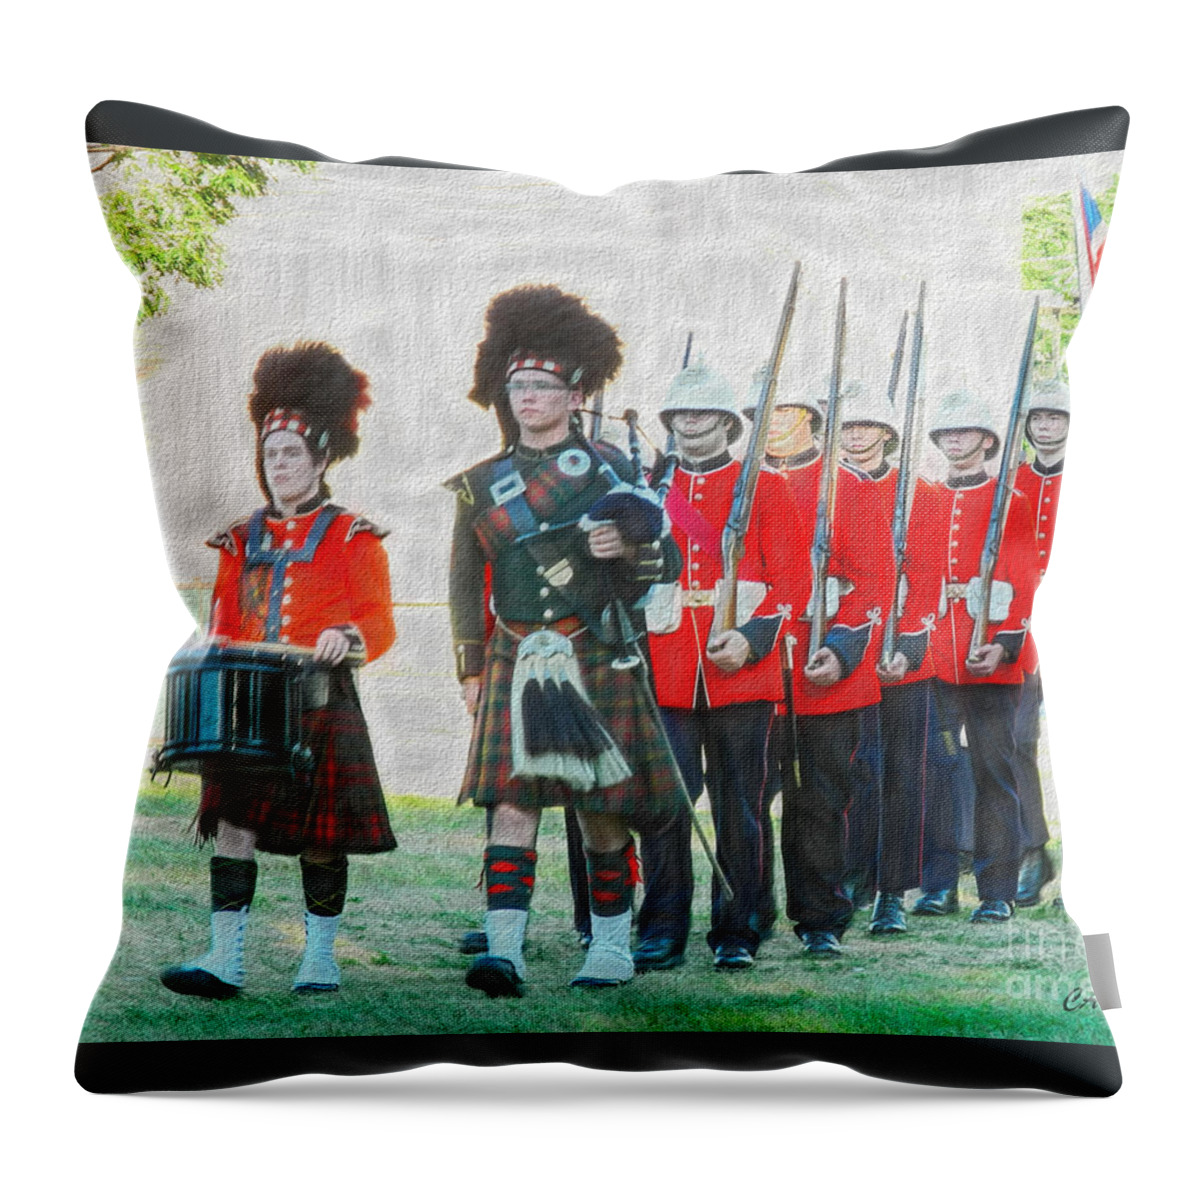 Guards Throw Pillow featuring the photograph Ceremonial Guards by Carol Randall